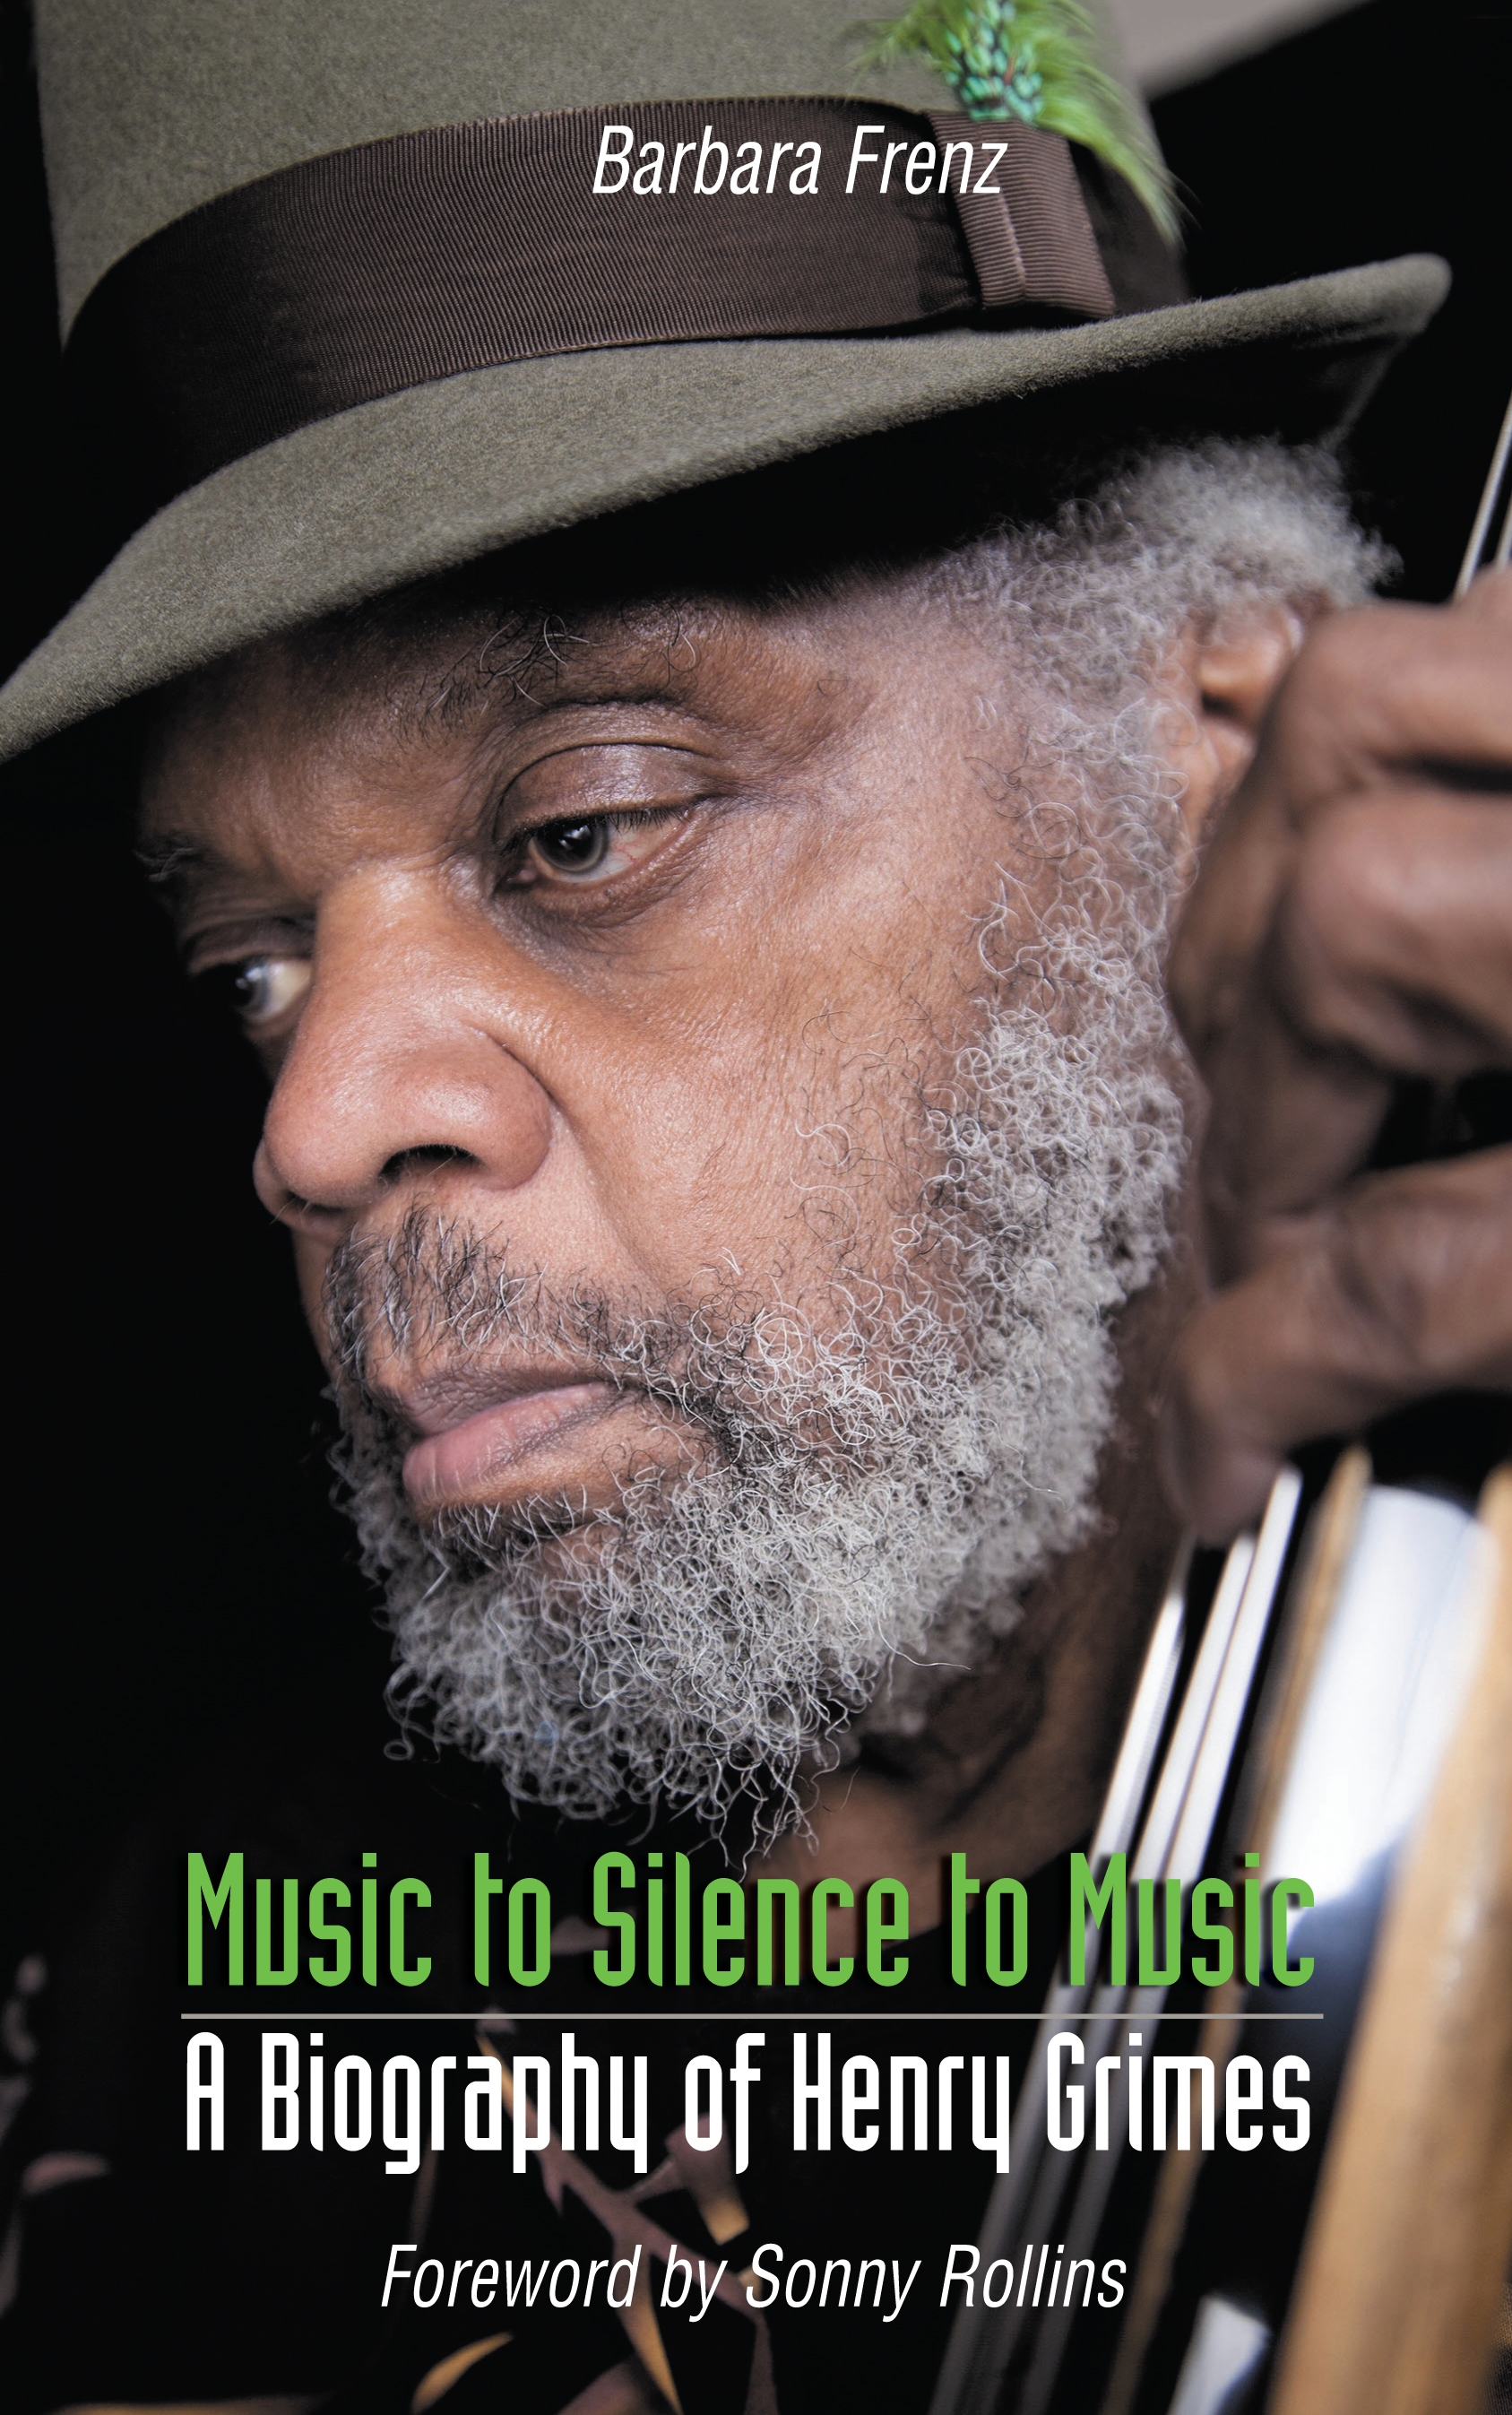 Barbara Frenz, Music to Silence to Music. A Biography of Henry Grimes. Foreword by Sonny Rollins. Northway Books London, 2015 (Cover-Foto: Hollis King, 2014)